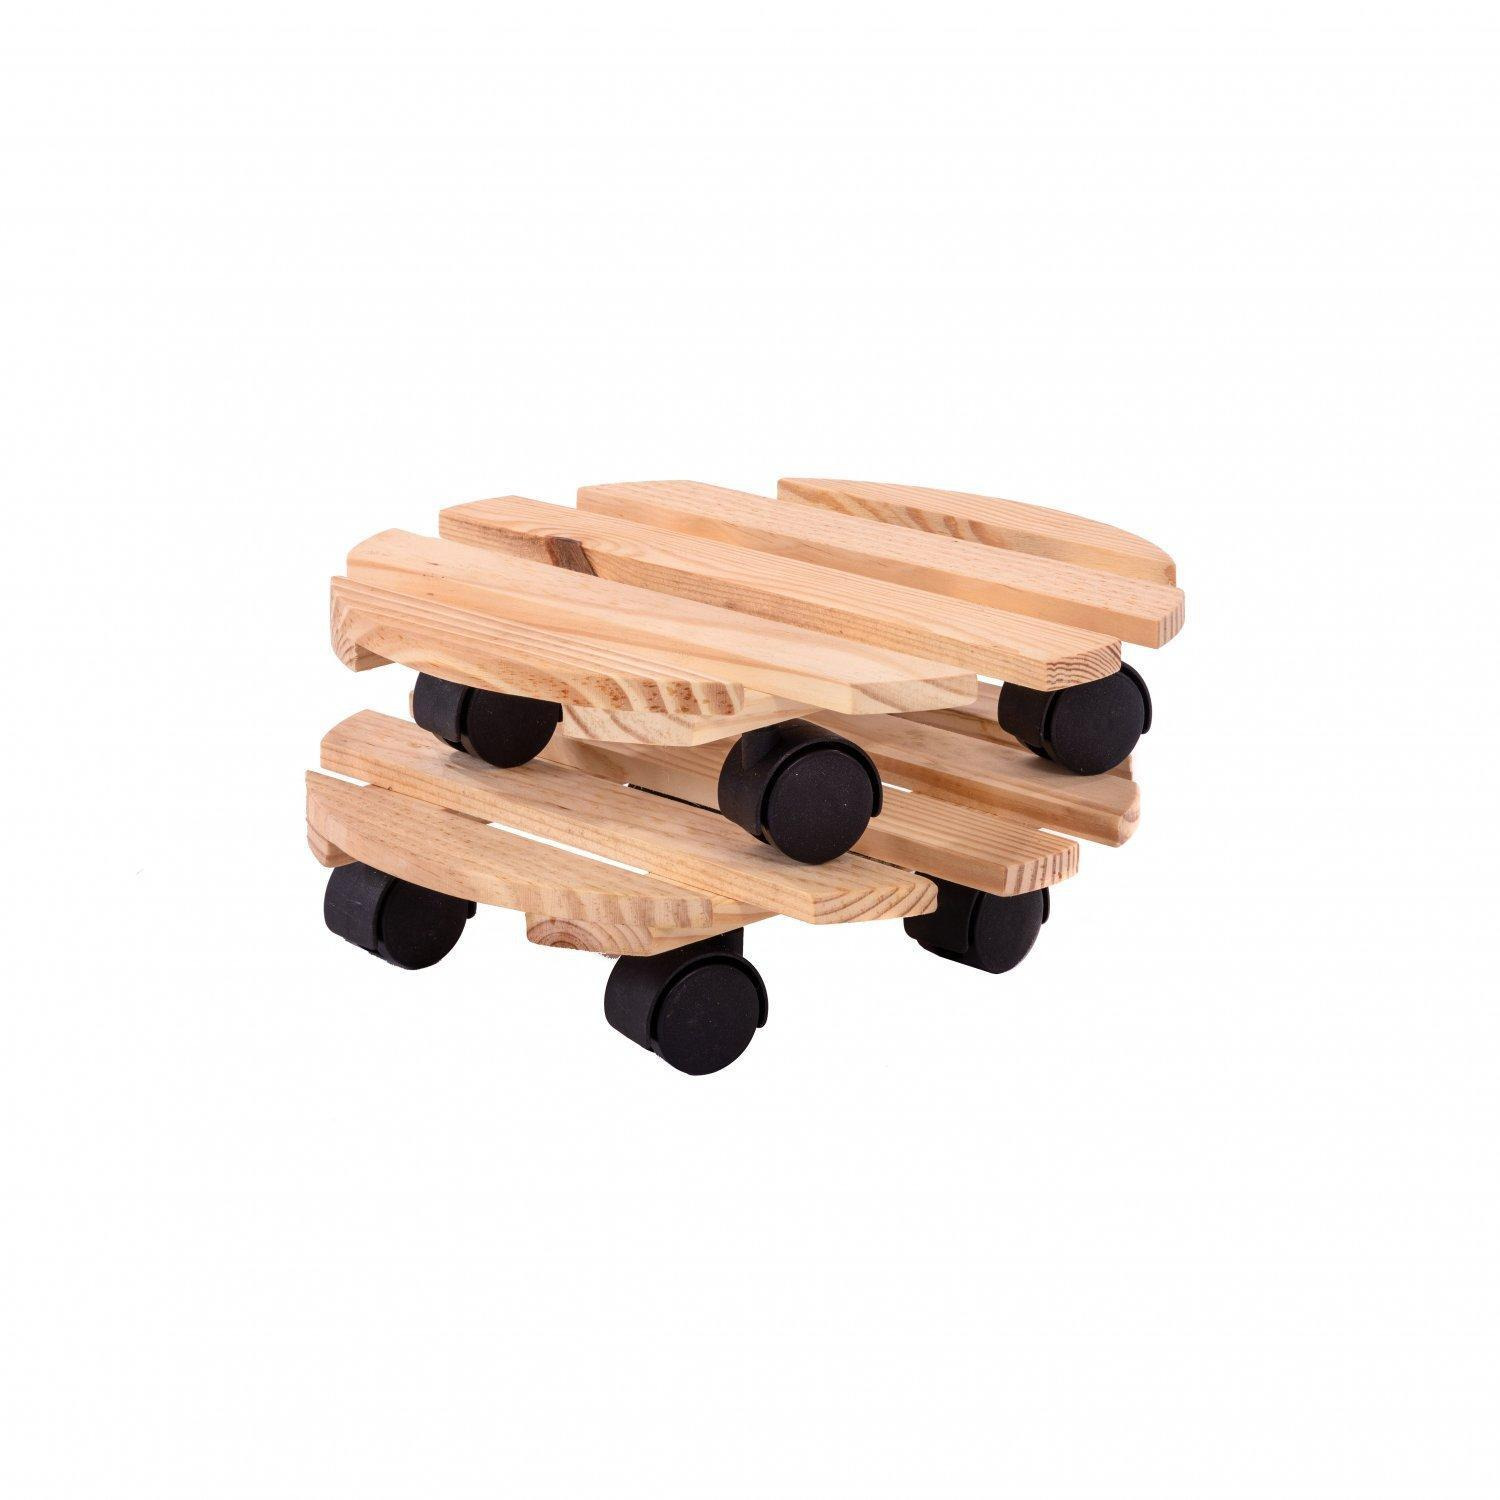 Set of 2 Wooden Plant Pot Mover Stands - image 1